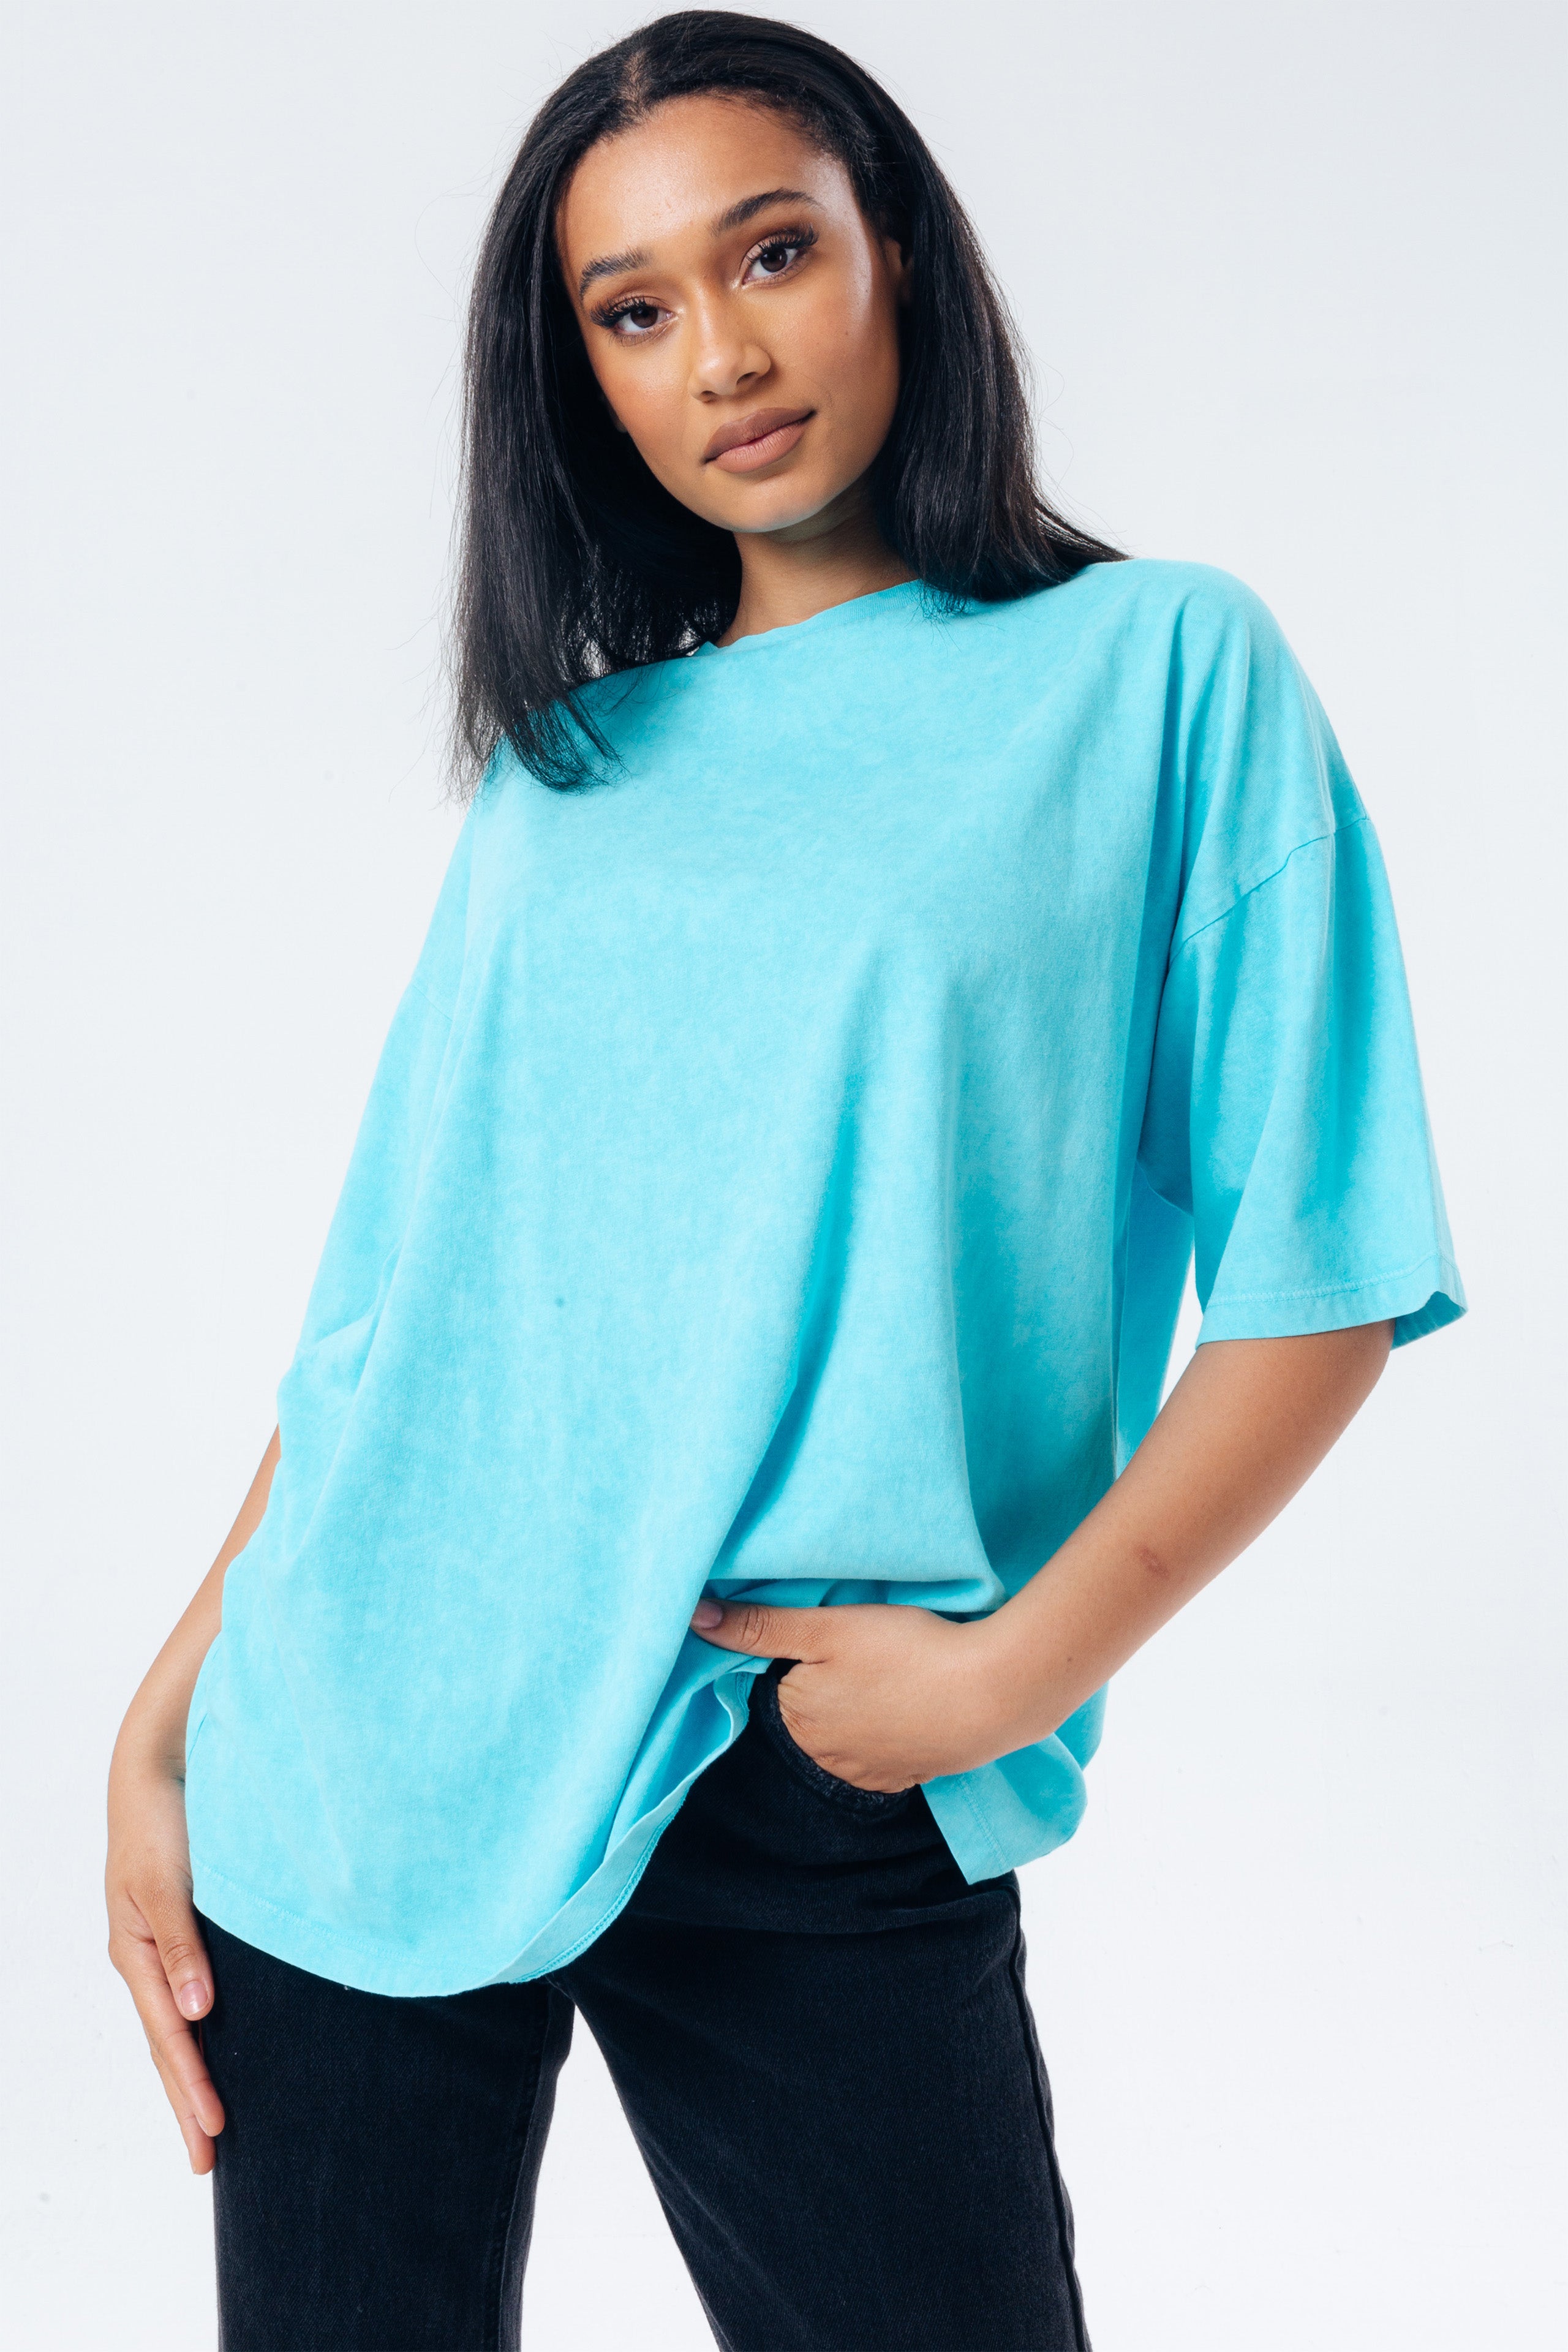 hype teal vintage women’s boxy fit t-shirt